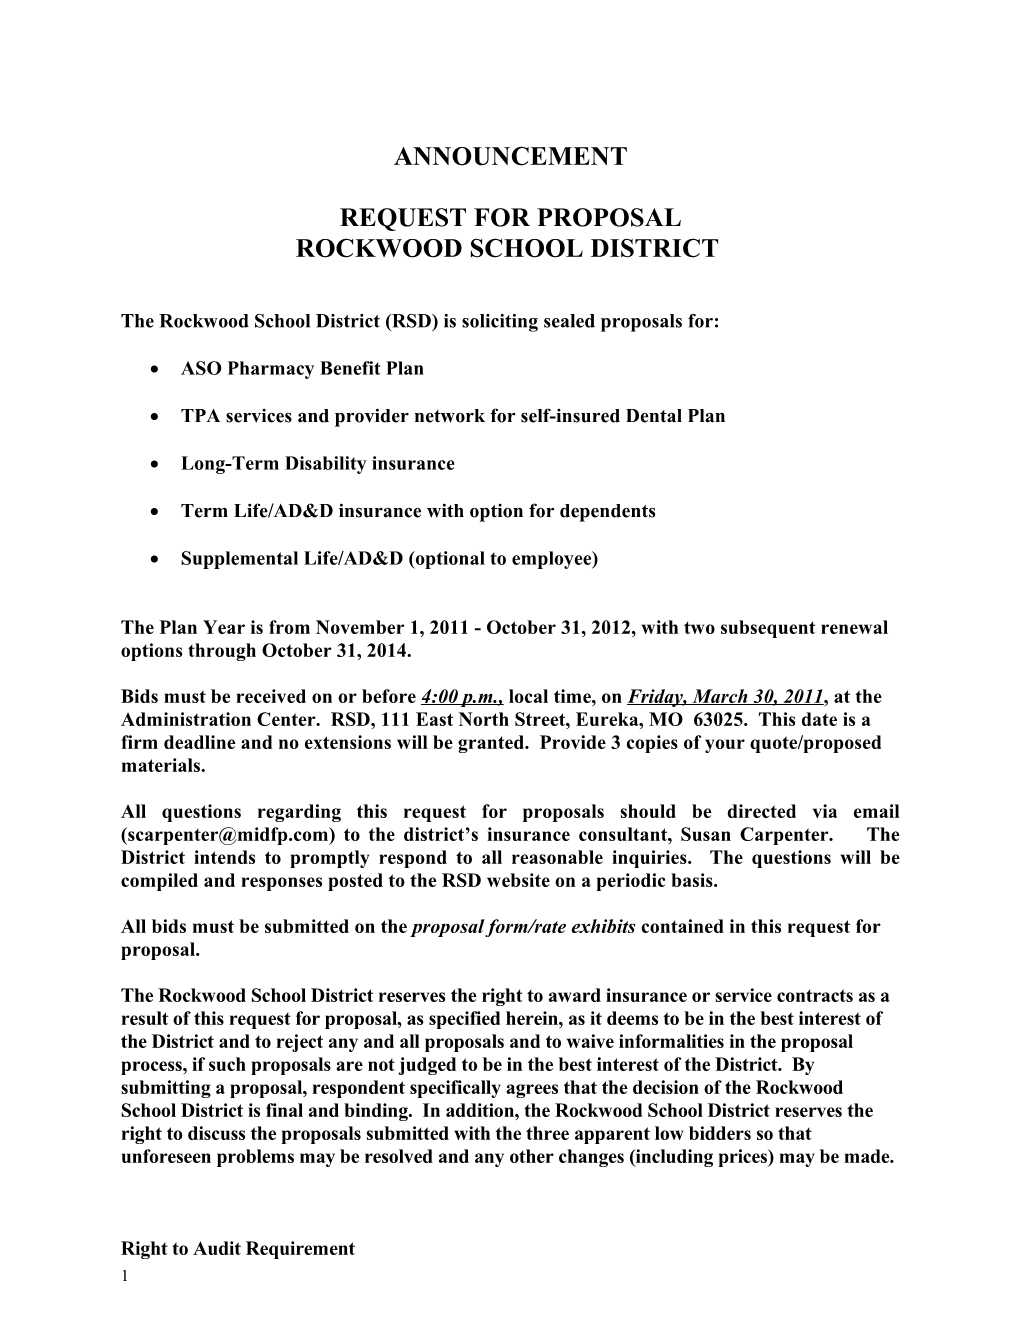 The Rockwoodschool District (RSD) Is Soliciting Sealed Proposals For